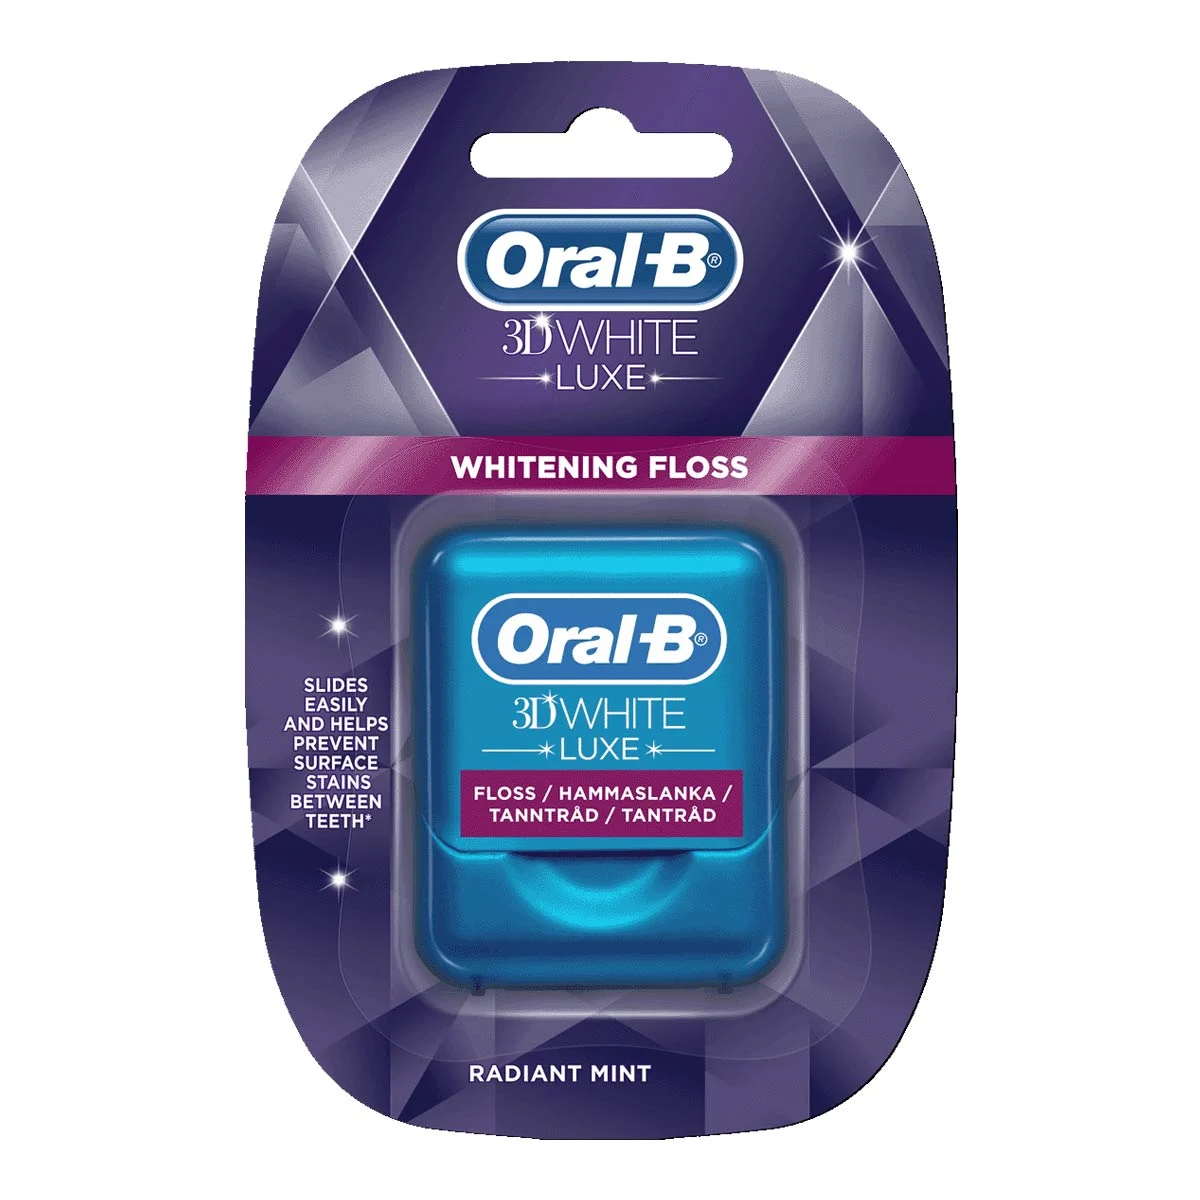 Oral-B 3D White Luxe Whitening tanntråd undefined